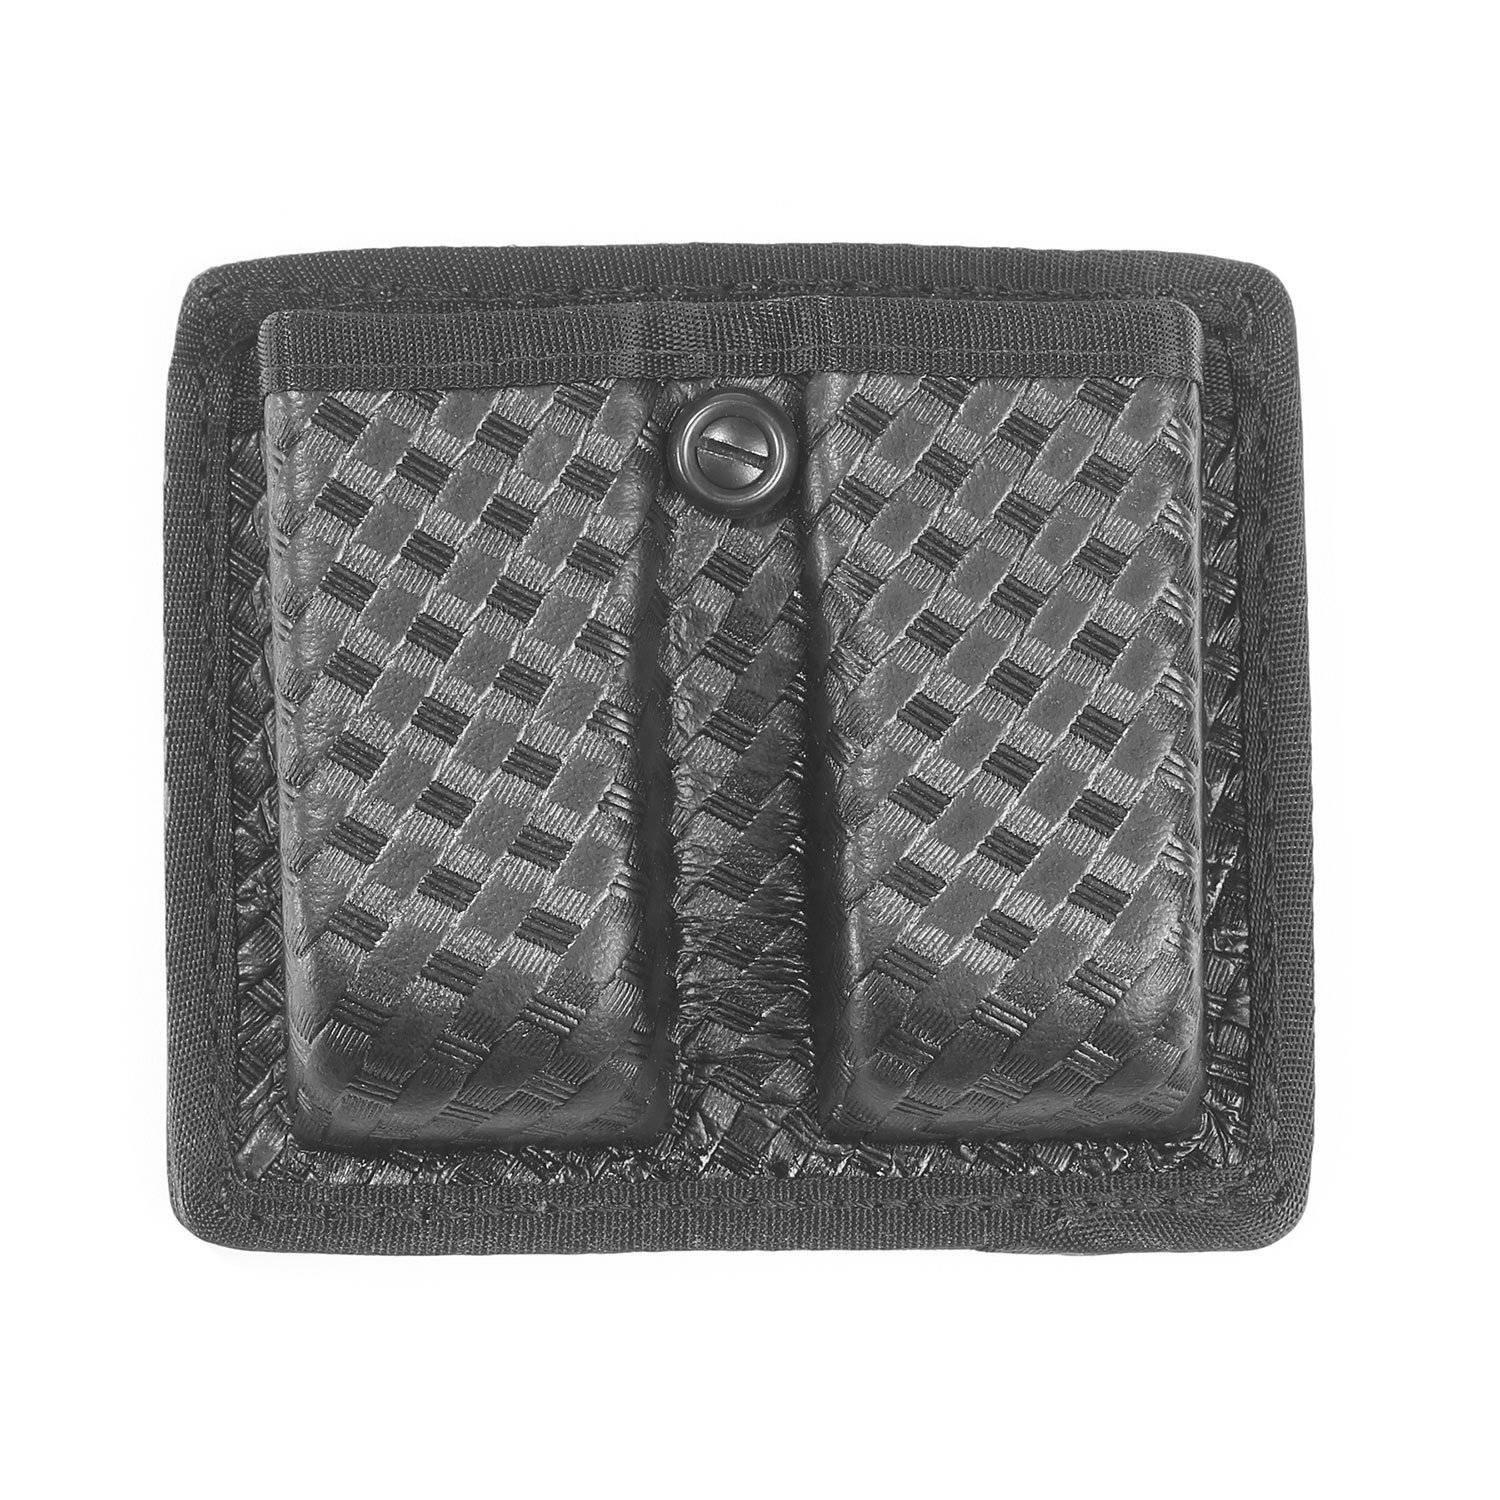 Gould and Goodrich L Force Open Top Double Magazine Pouch